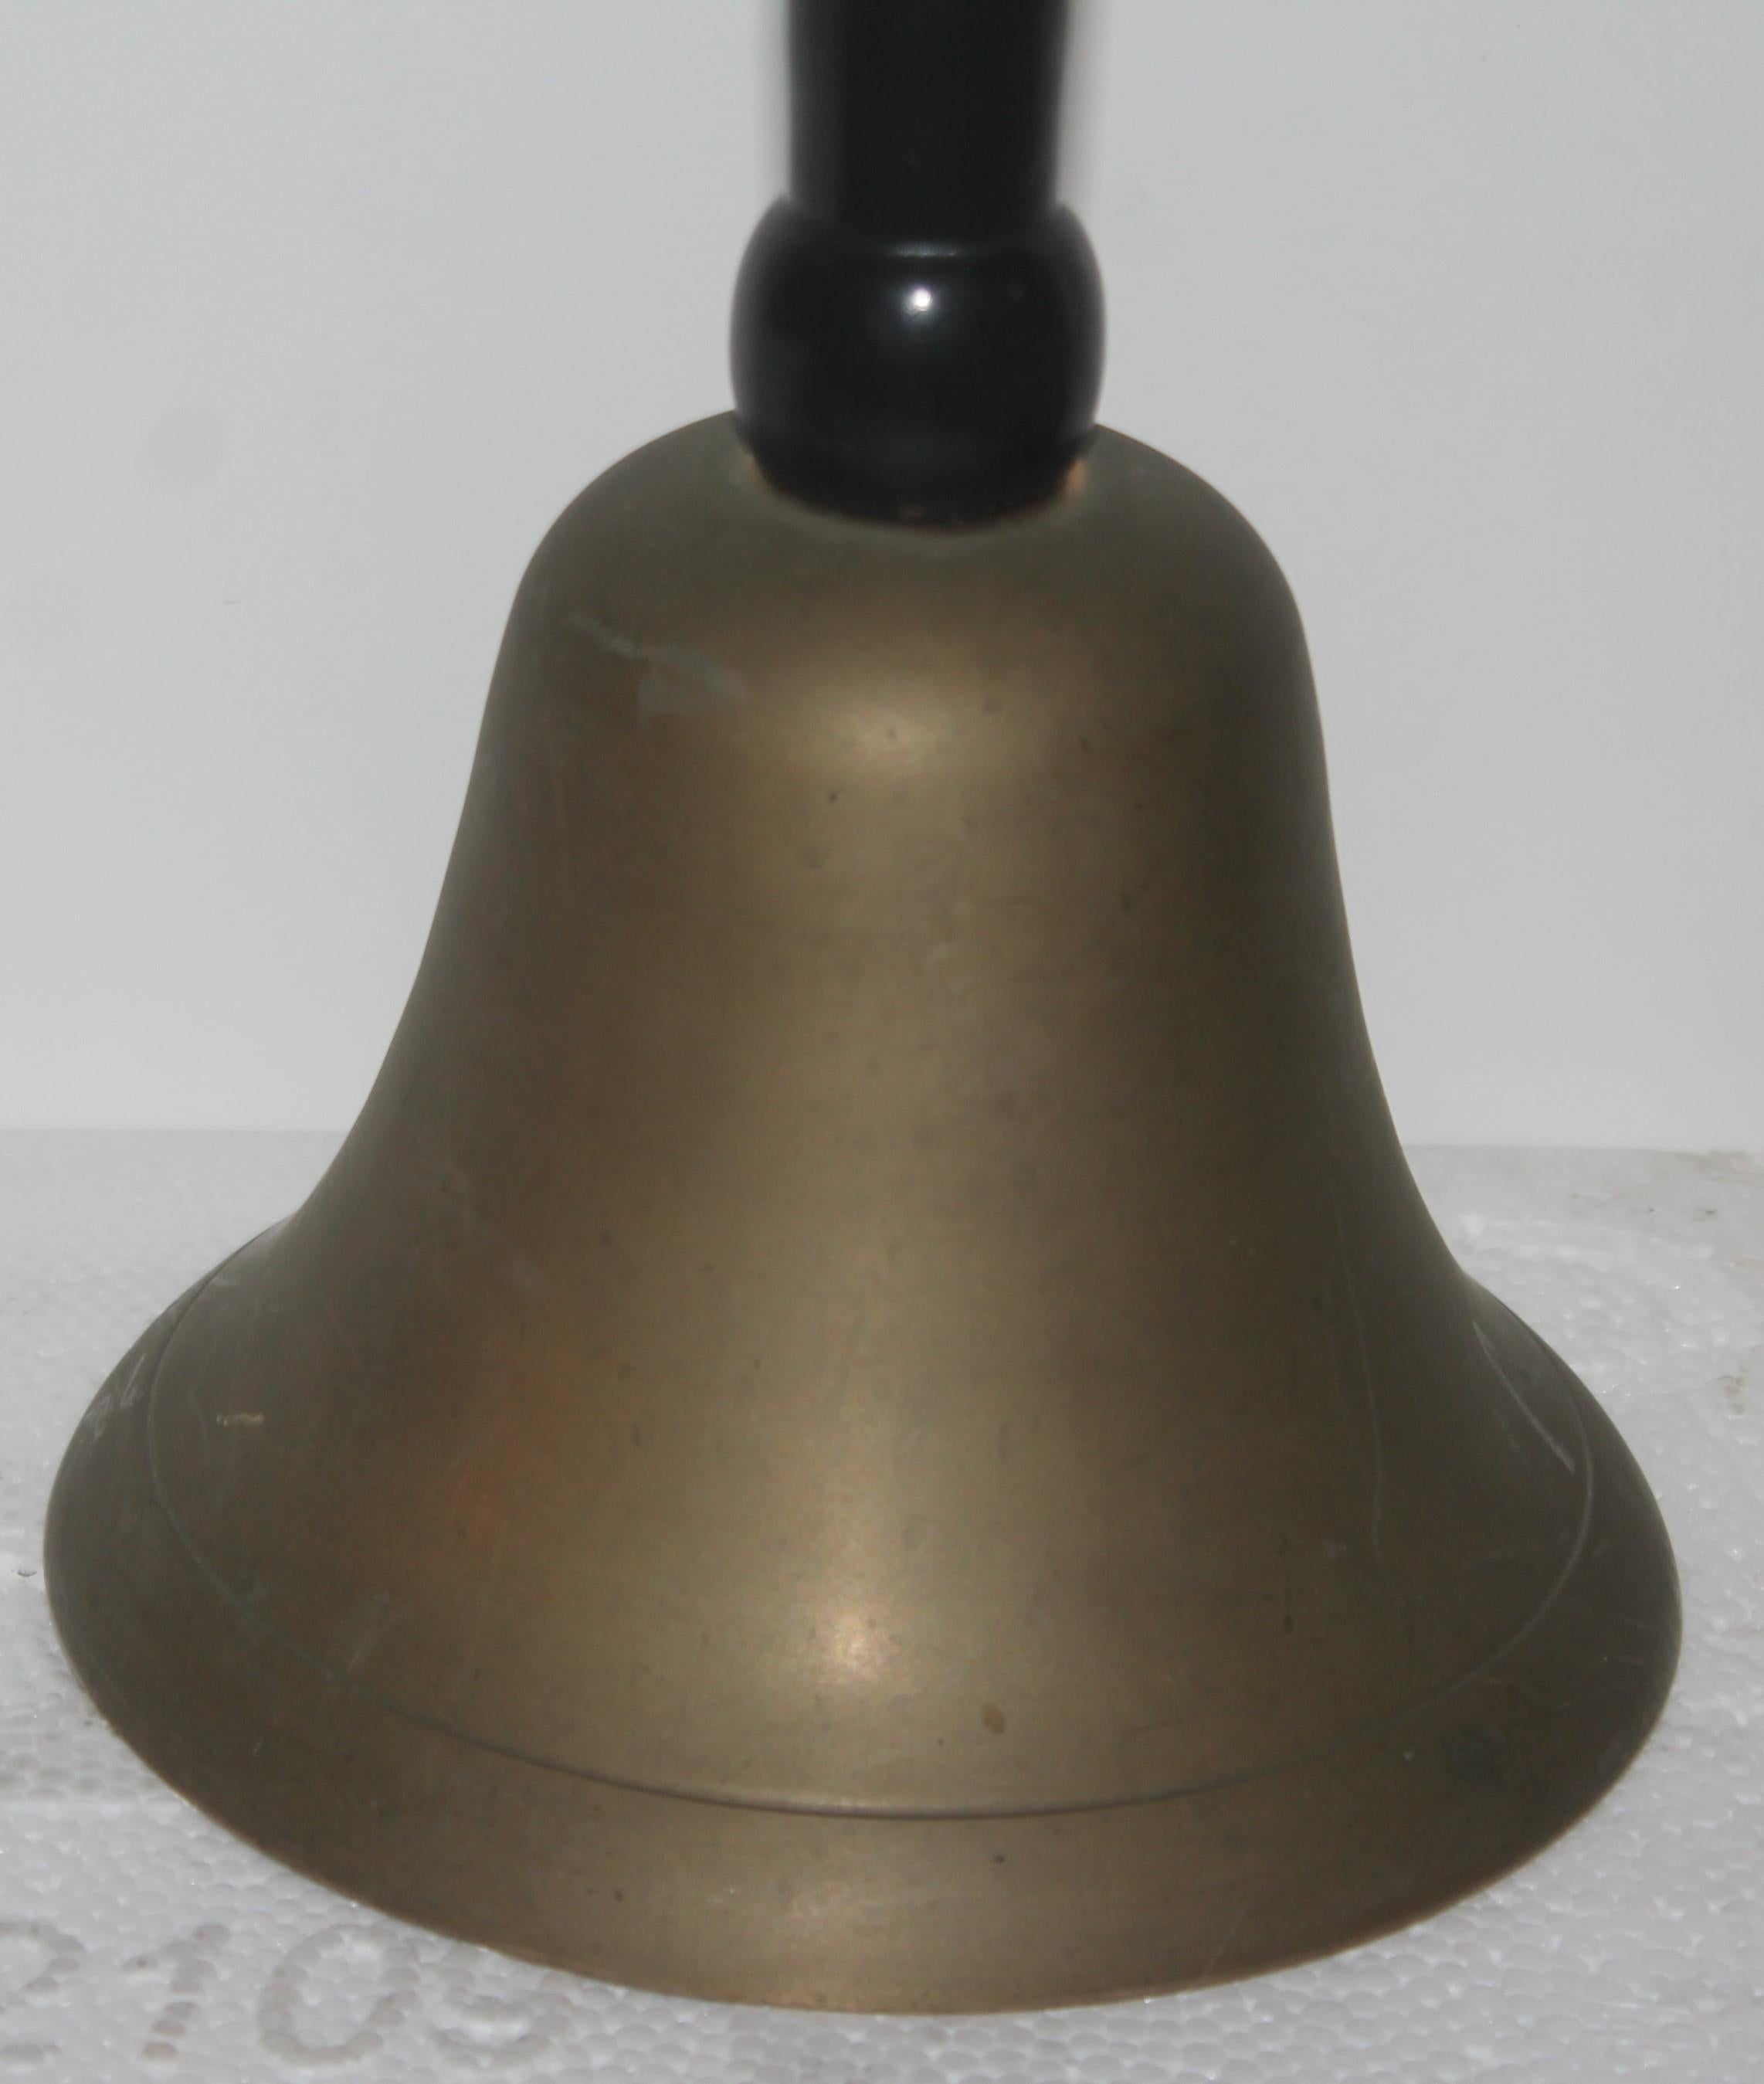 This large 19th century brass dinner or school bell is in fine condition and rings like a school bell.